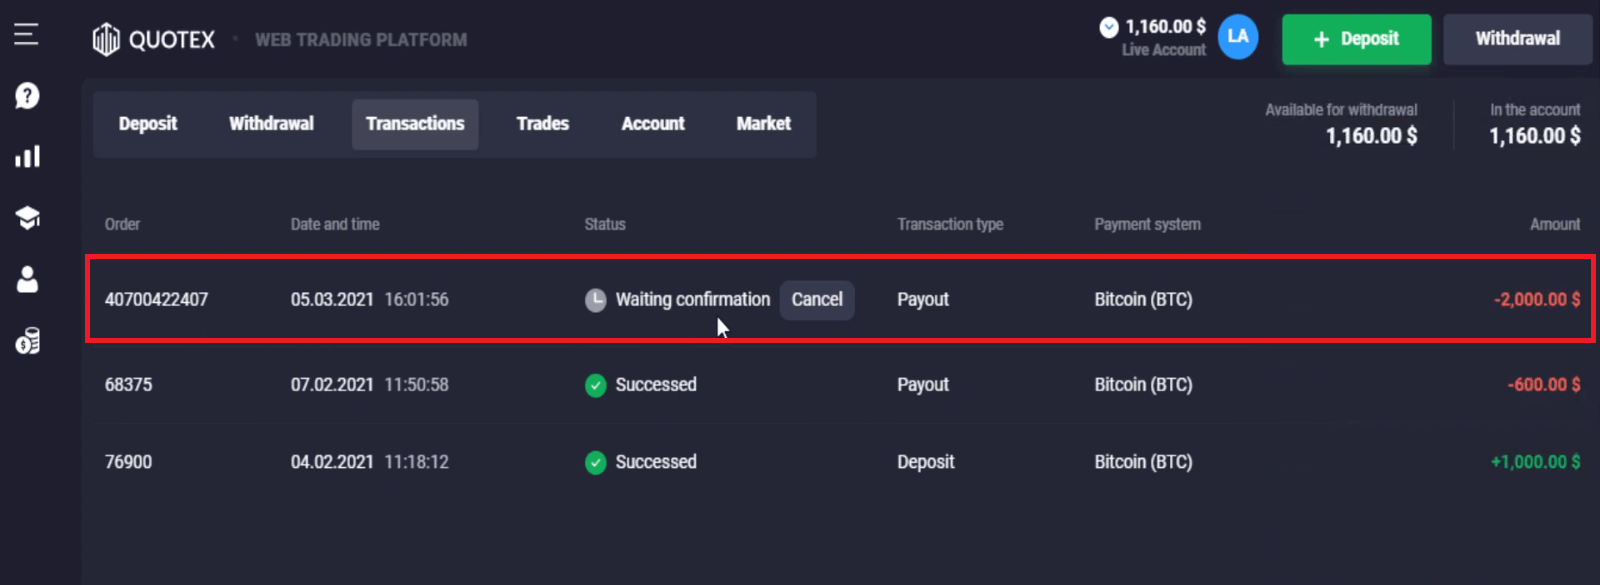 How to Trade Digital Options and Withdraw Money from Quotex